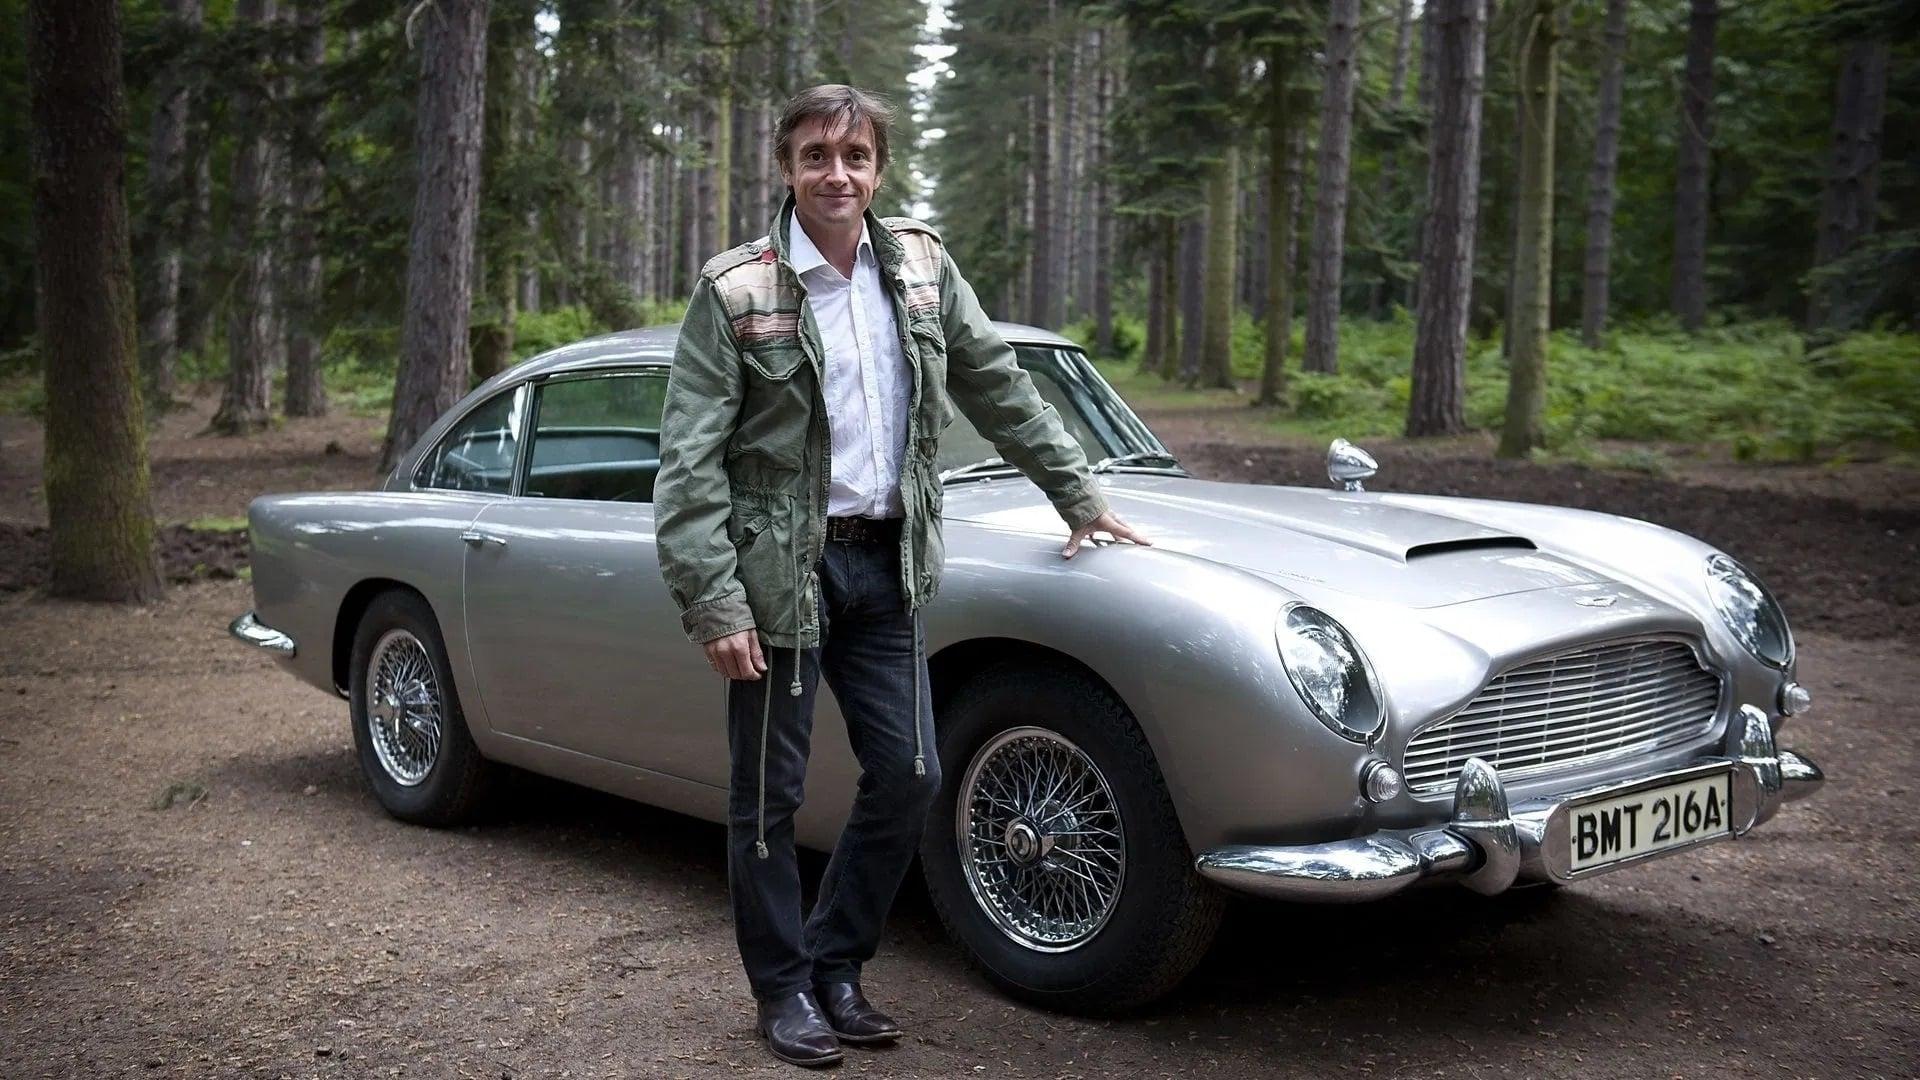 Top Gear: 50 Years of Bond Cars backdrop